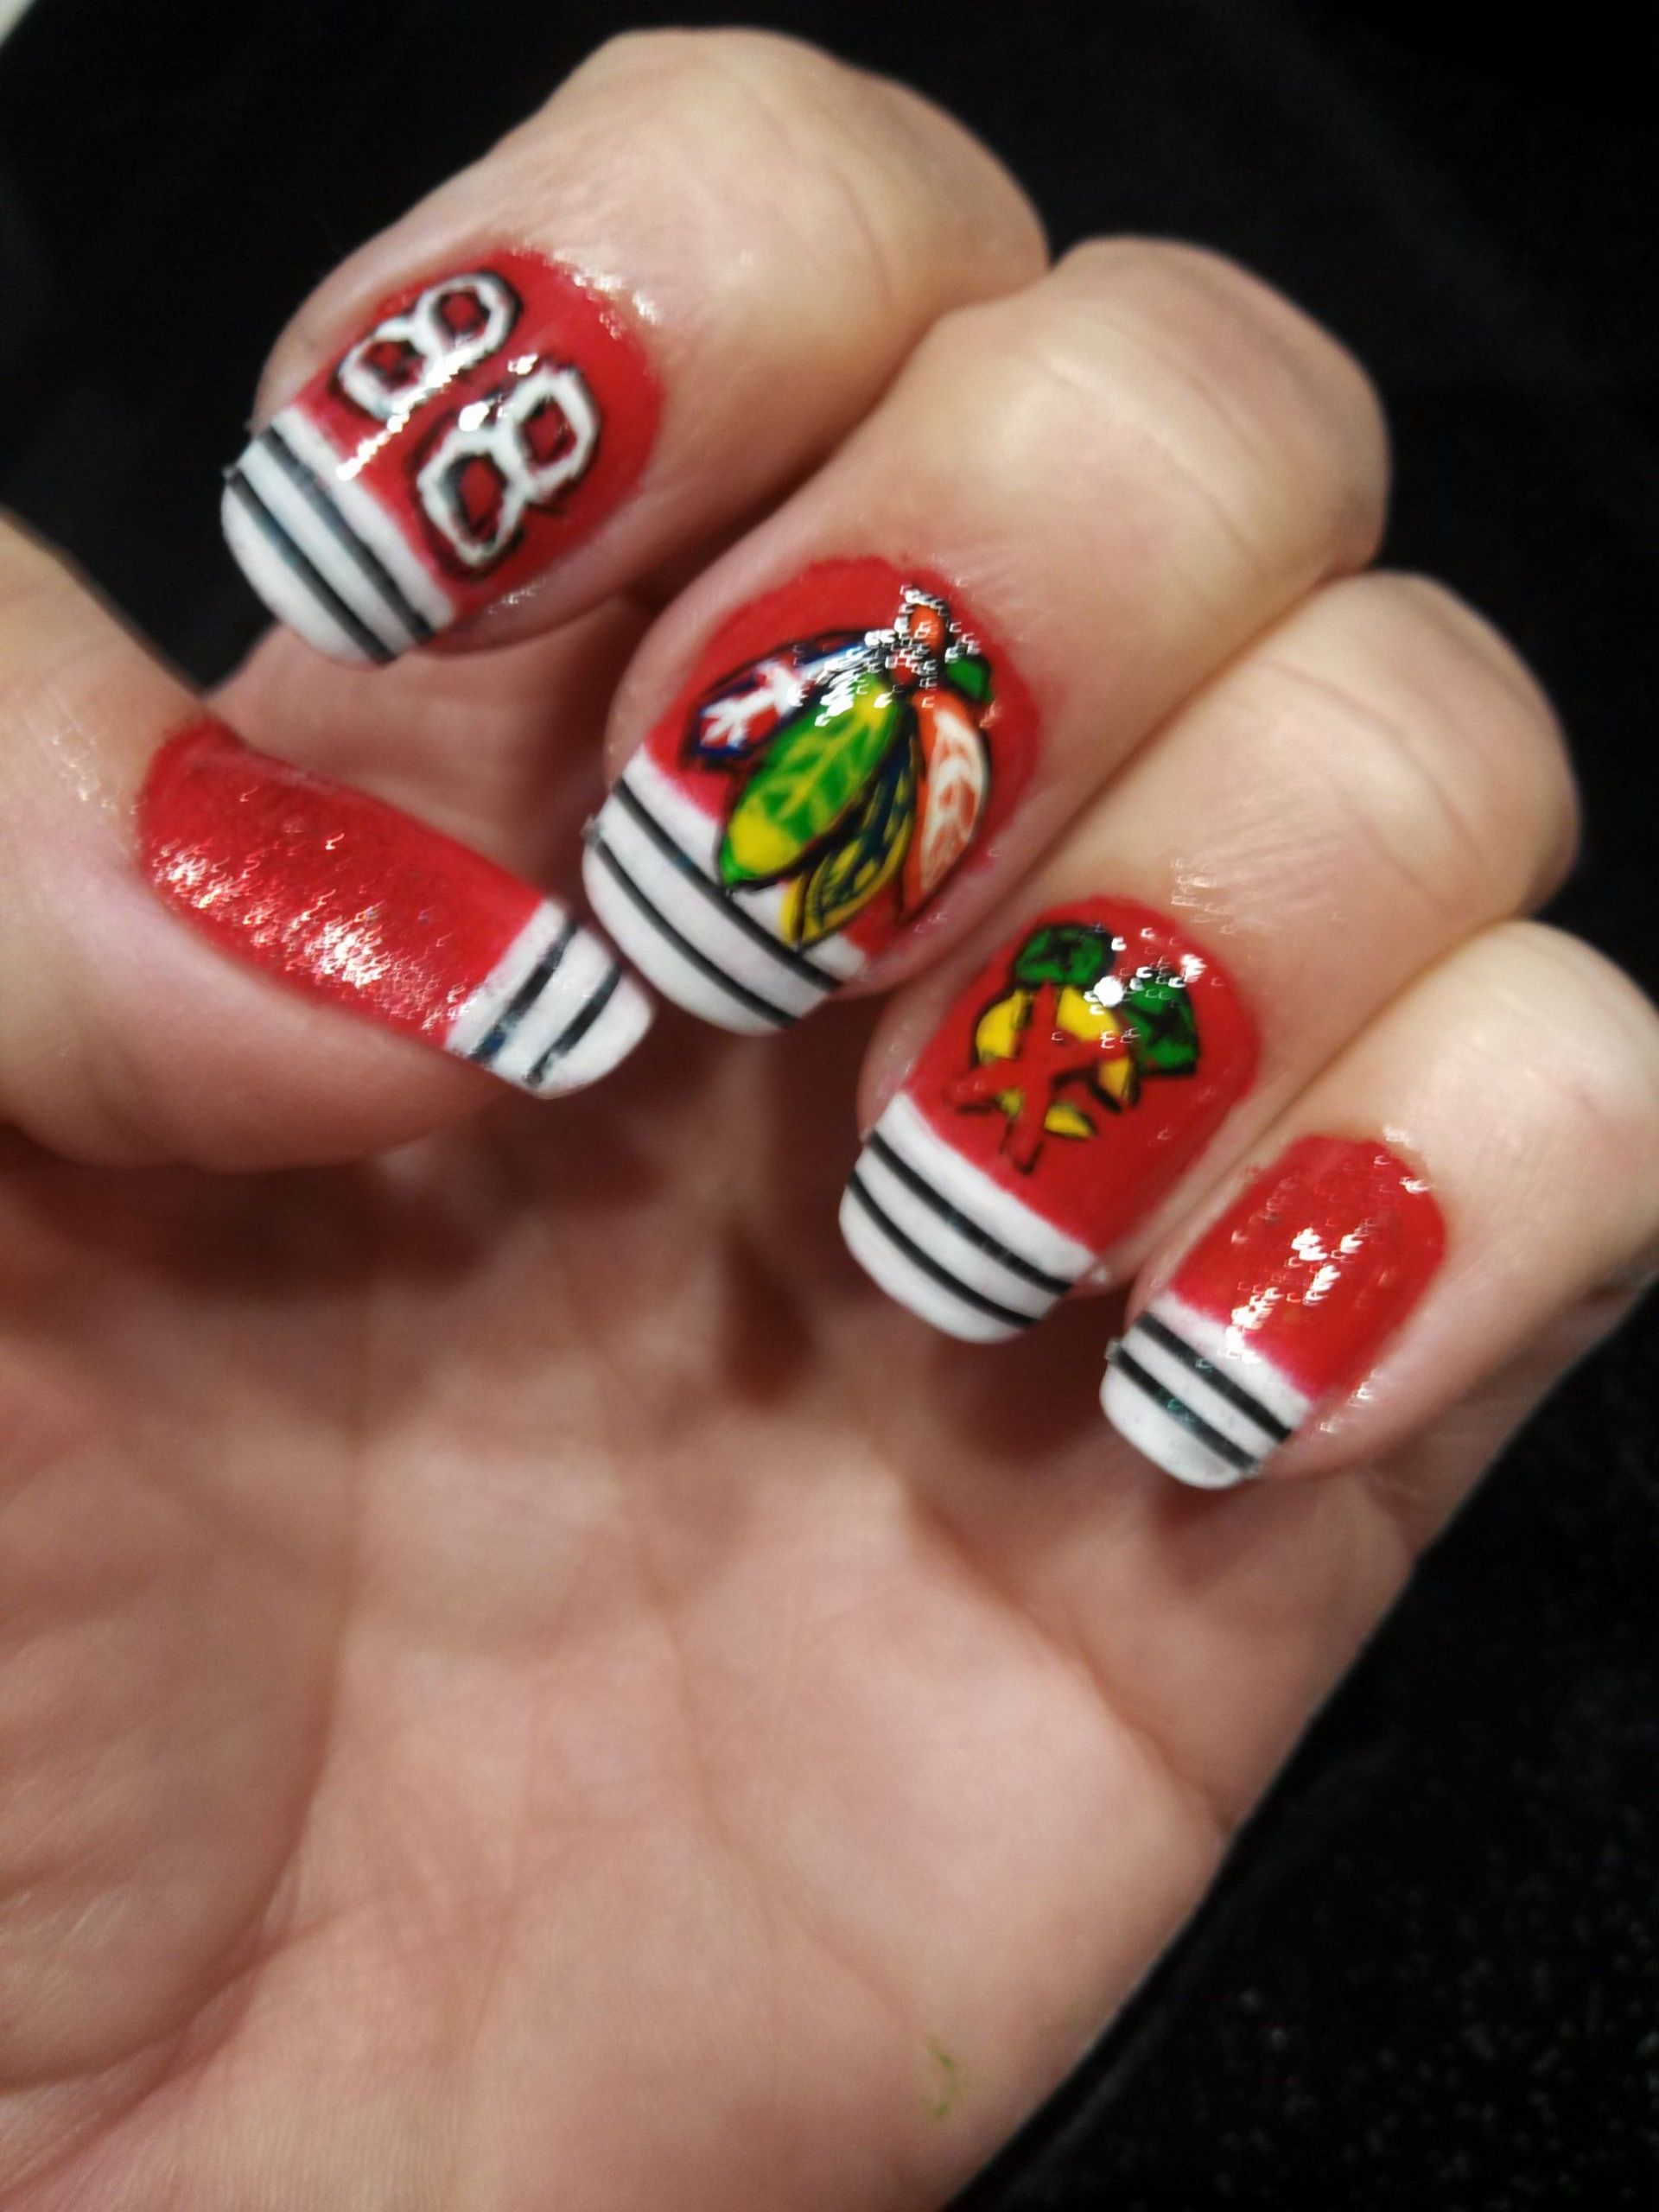 Chicago Blackhawks Nail Art
 Chicago Black Hawks Nail Art My first time at it Need